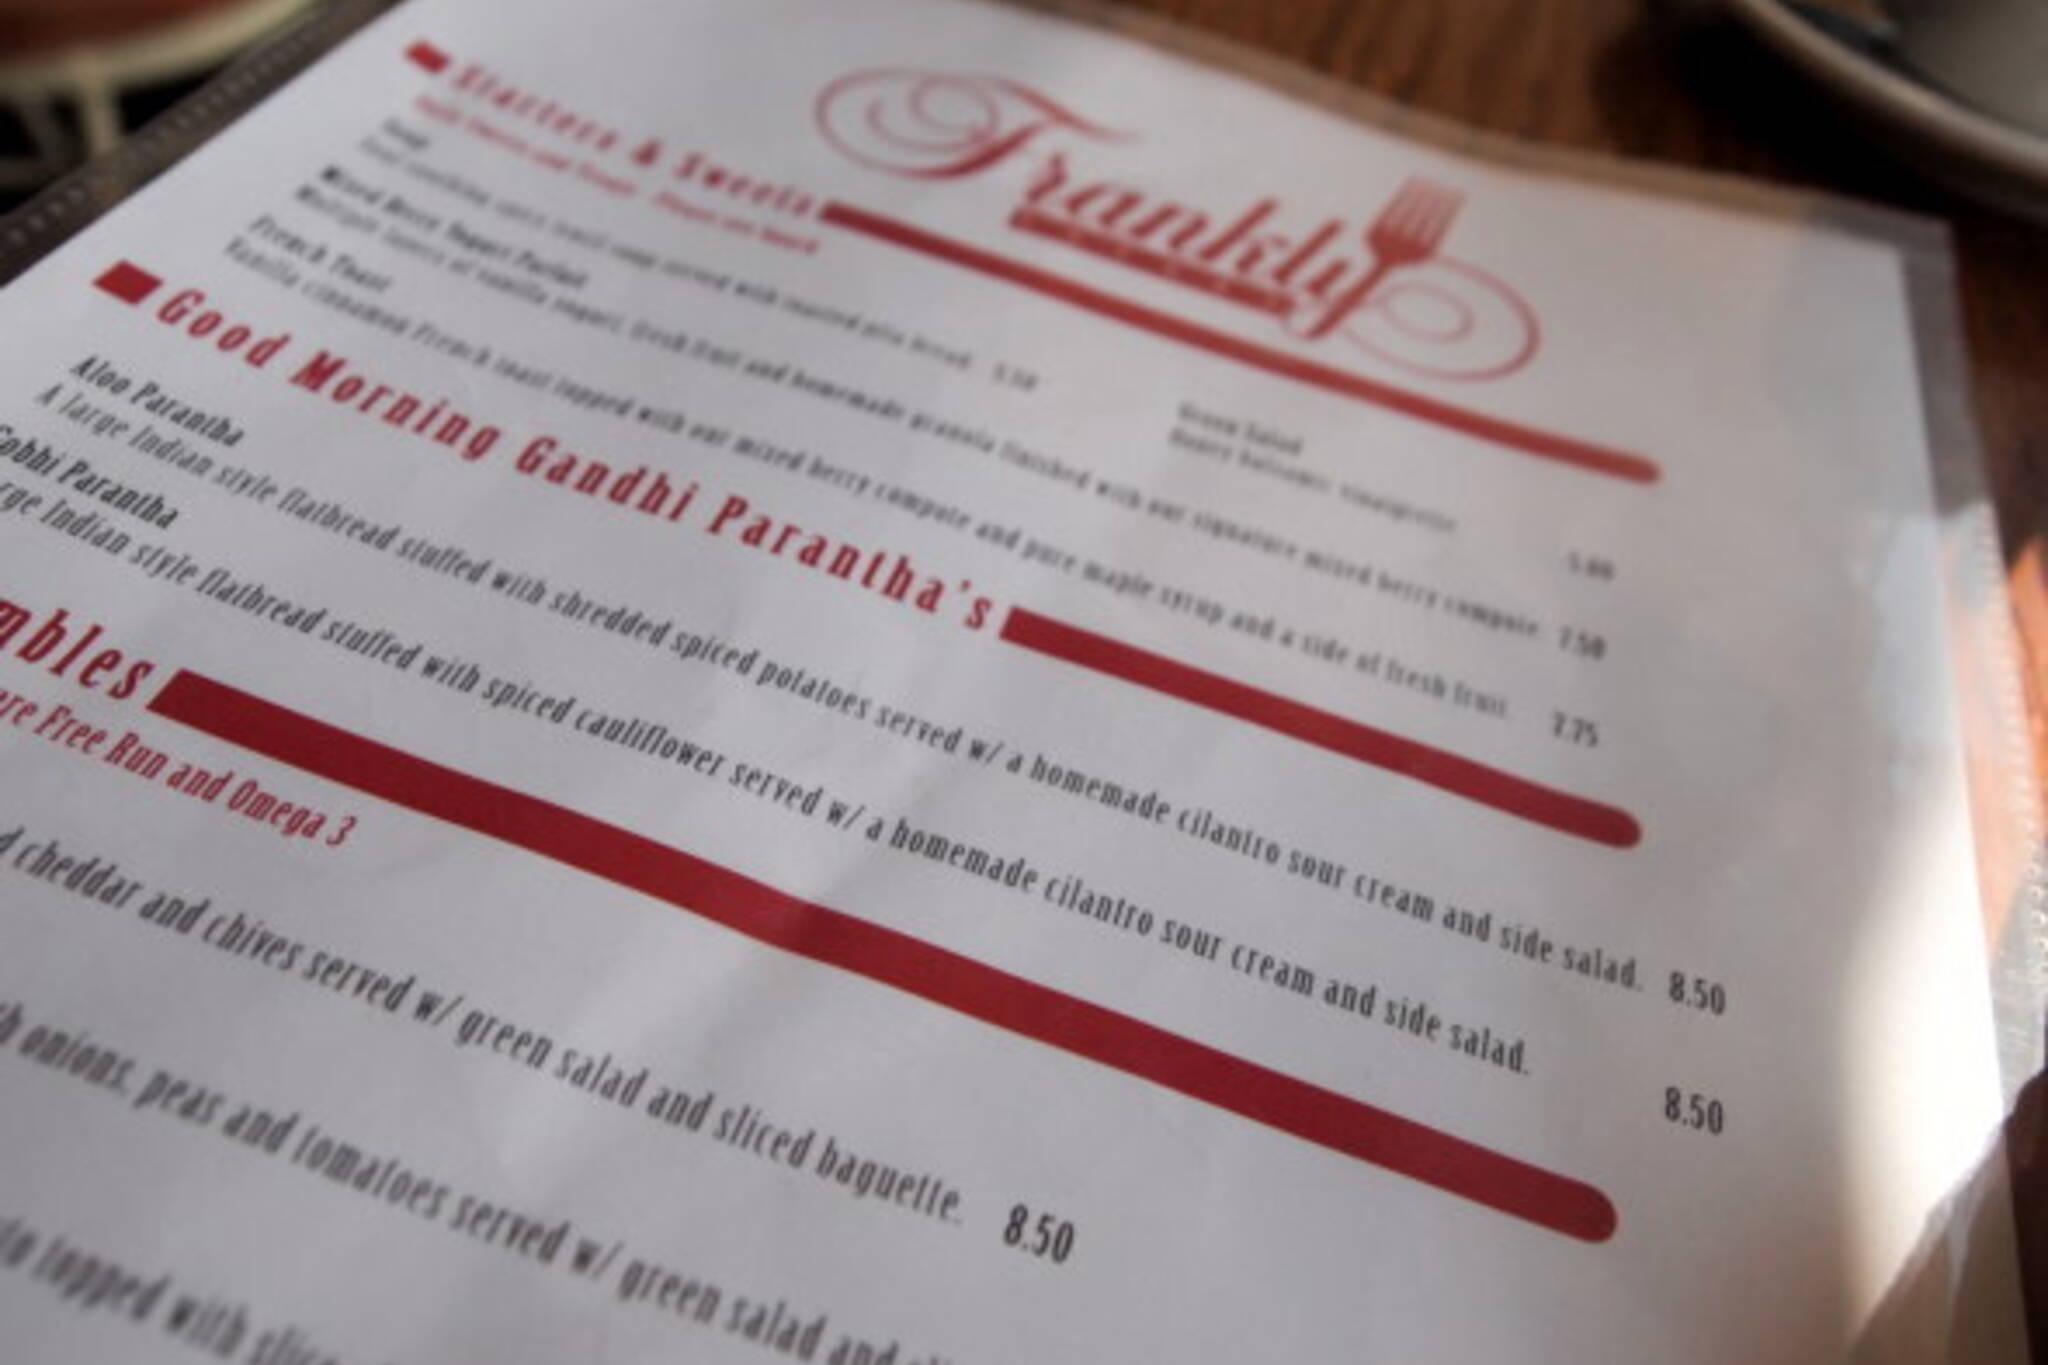 Frankly Eatery